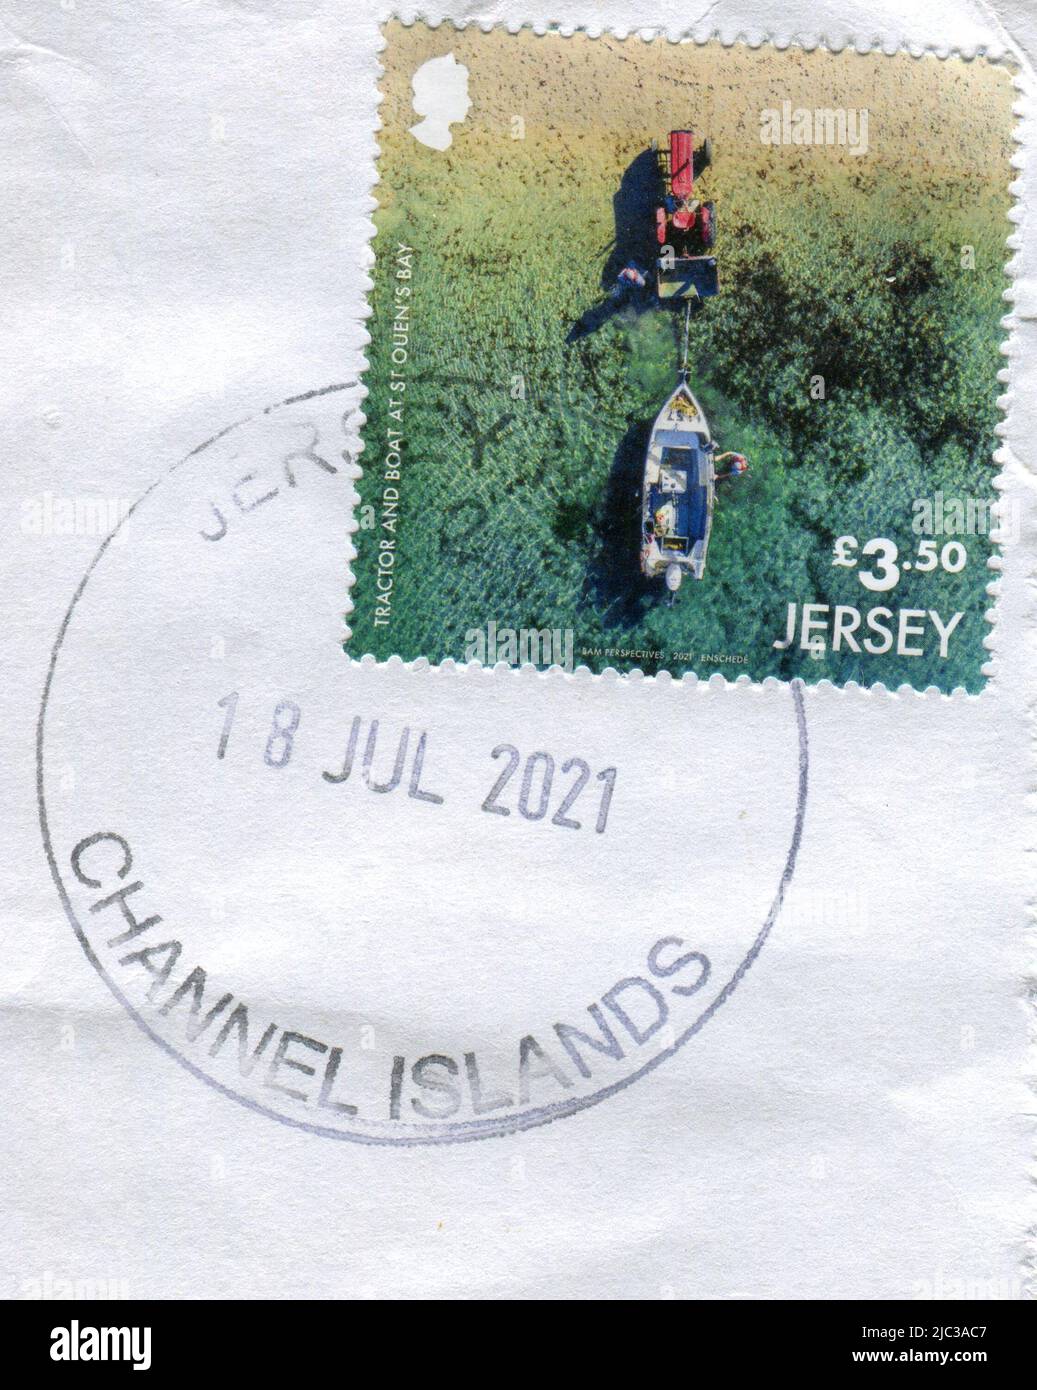 A Jersey postage stamp featuring a tractor and boat at St. Ouen's Bay, 18 July 2021. Stock Photo